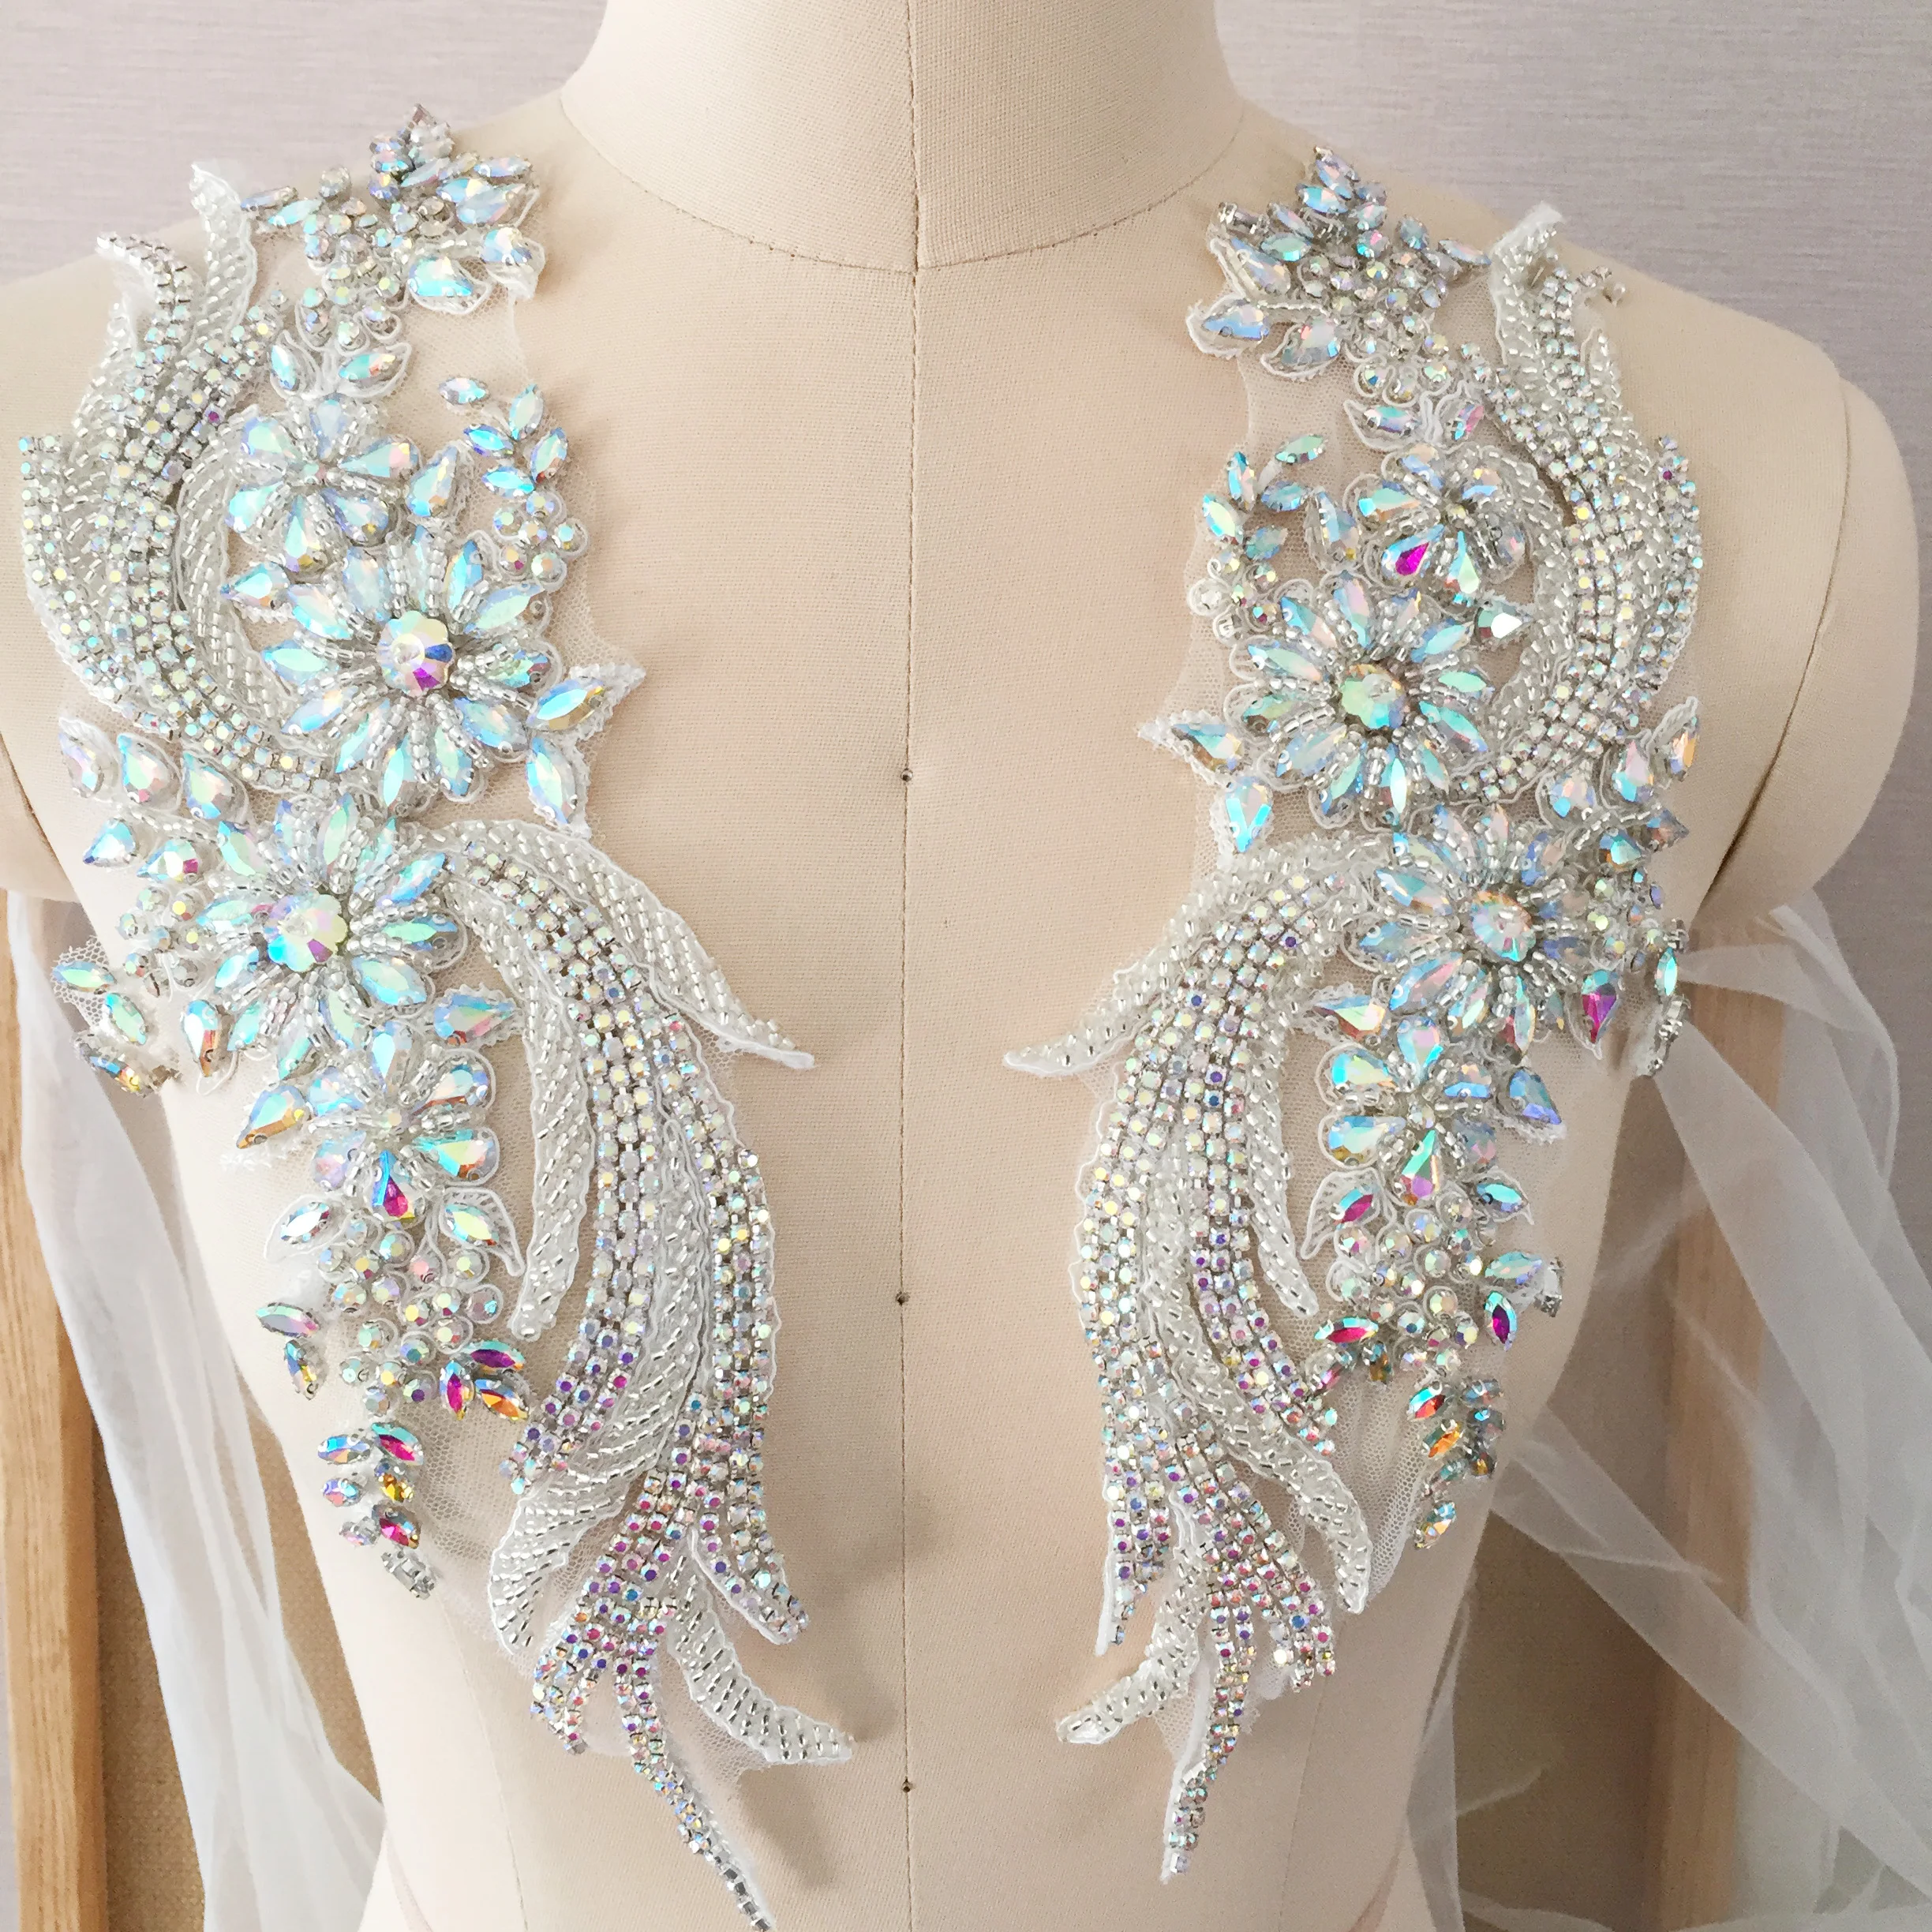 

1 Pair Delicate Phoenix AB Rhinestone Beaded Applique Crystal Bridal Gown Bodice Cape Couture Crystal Applique